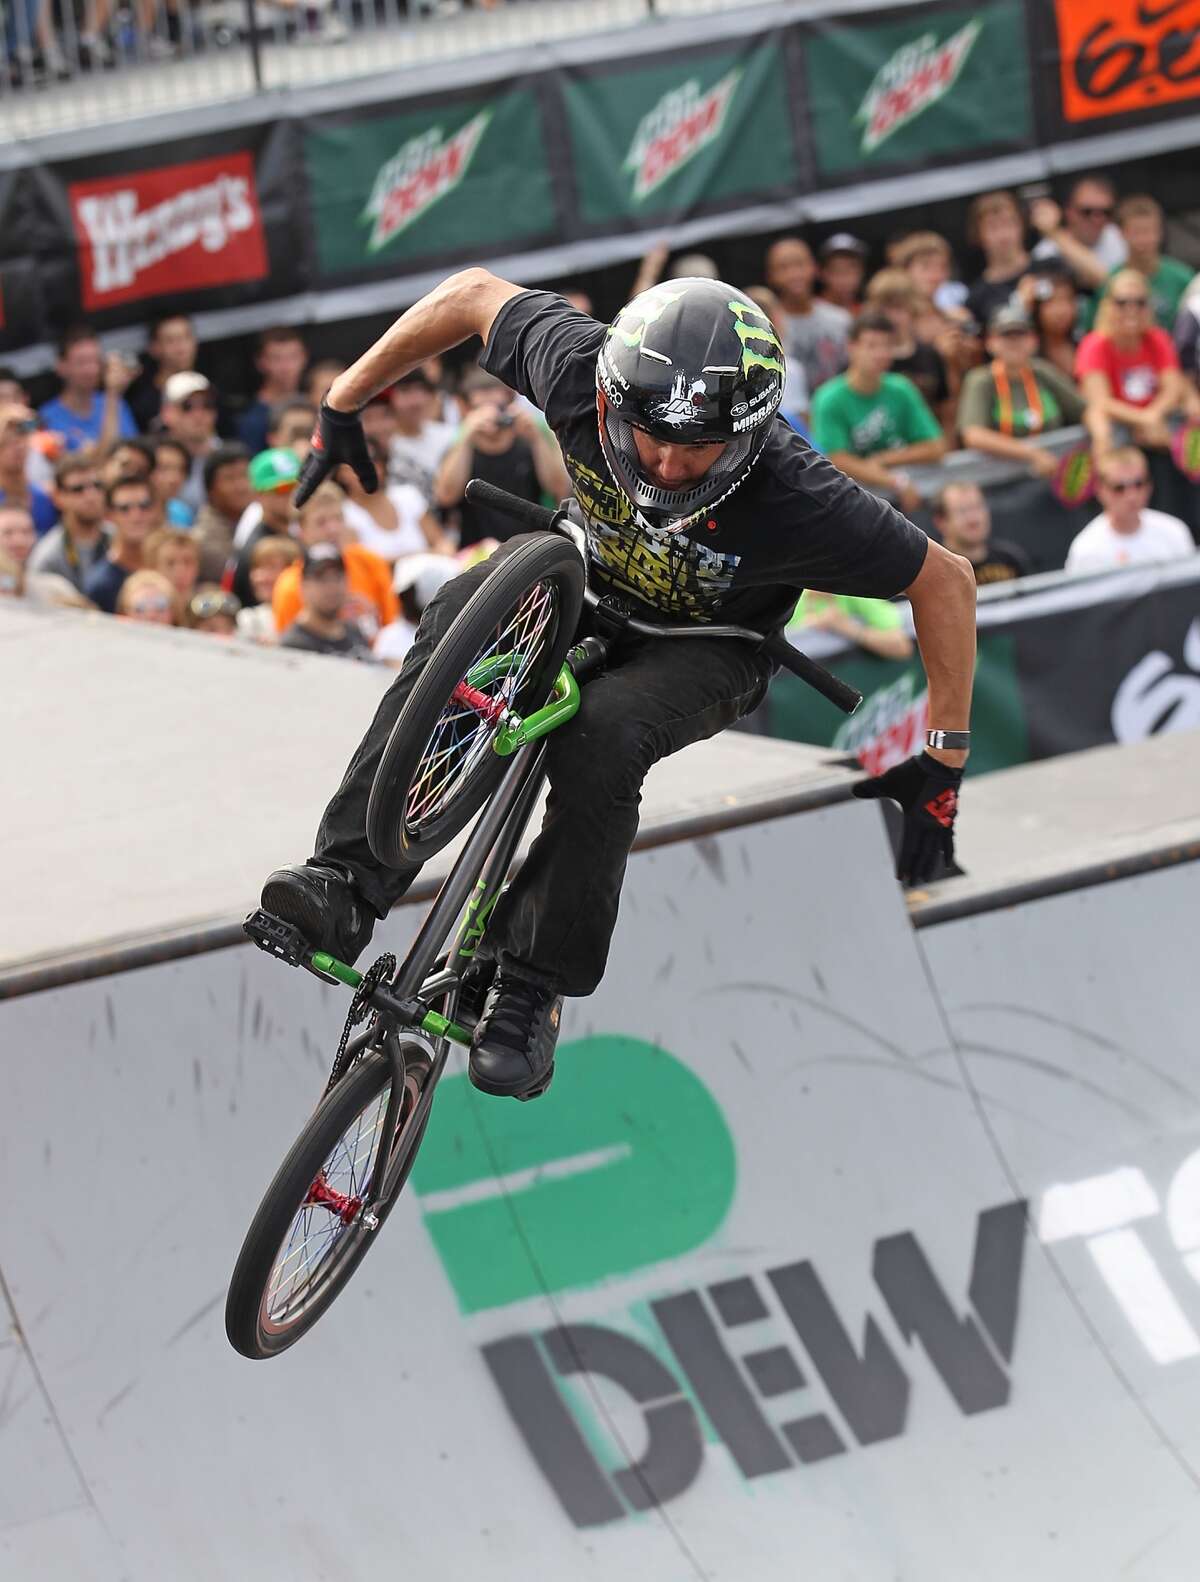 CHICAGO - JULY 24: Dave Mirra, from Greenville, North Carolina, performs during the Park Finals of the 6.0 BMX Open at Soldier Field on July 24, 2010 in Chicago, Illinois. (Photo by Jonathan Daniel/Getty Images)